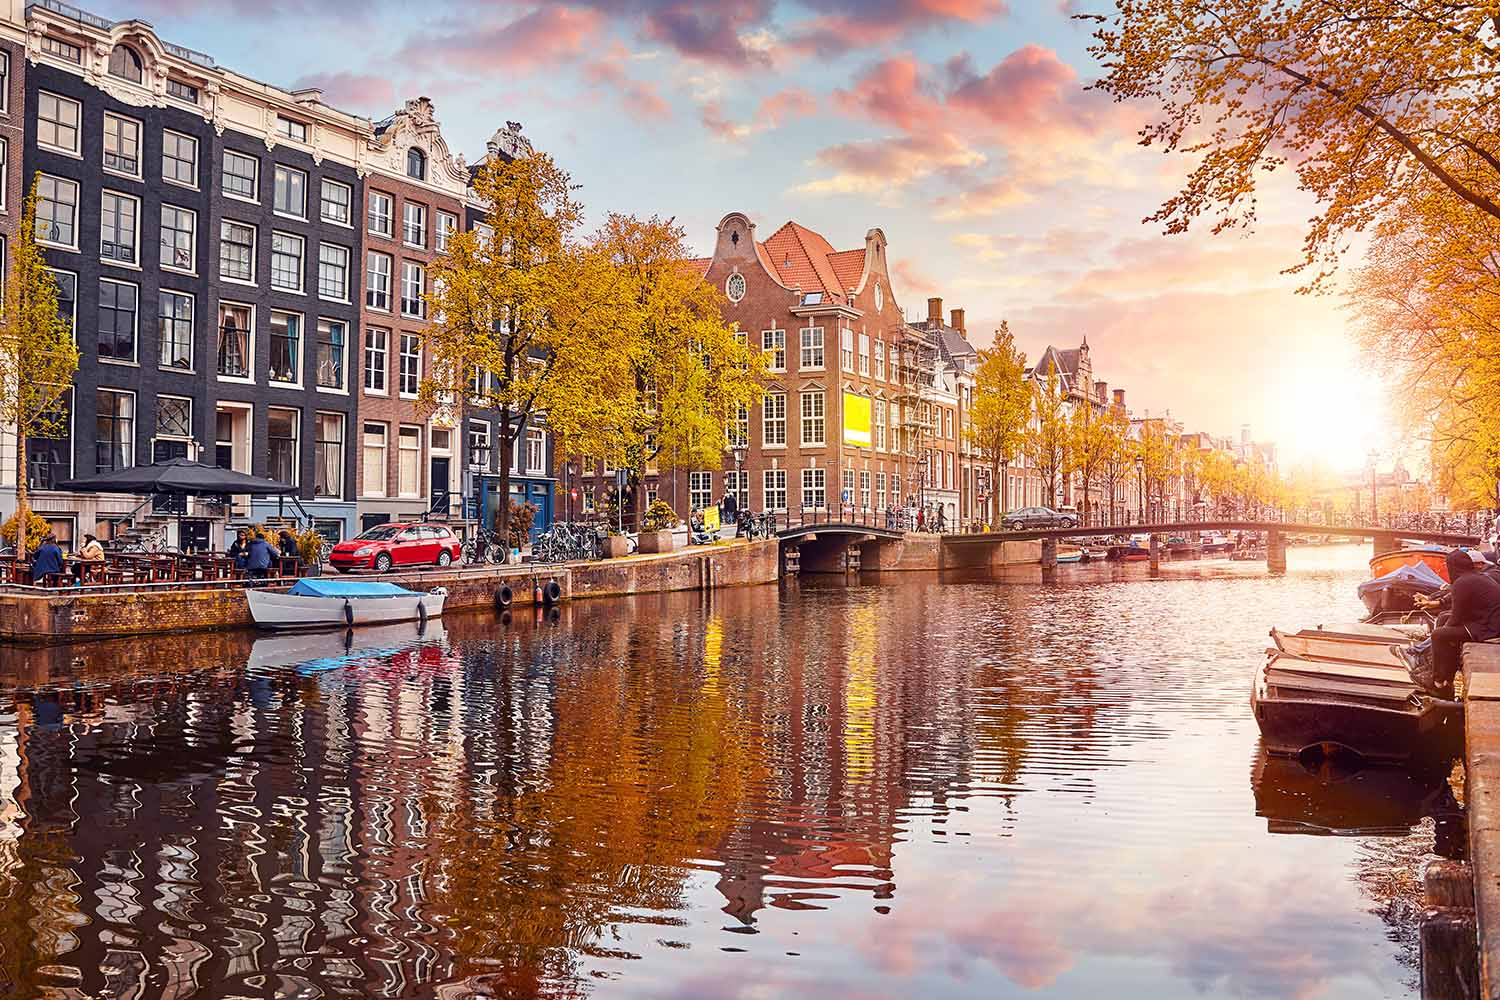 33 interesting facts about Amsterdam